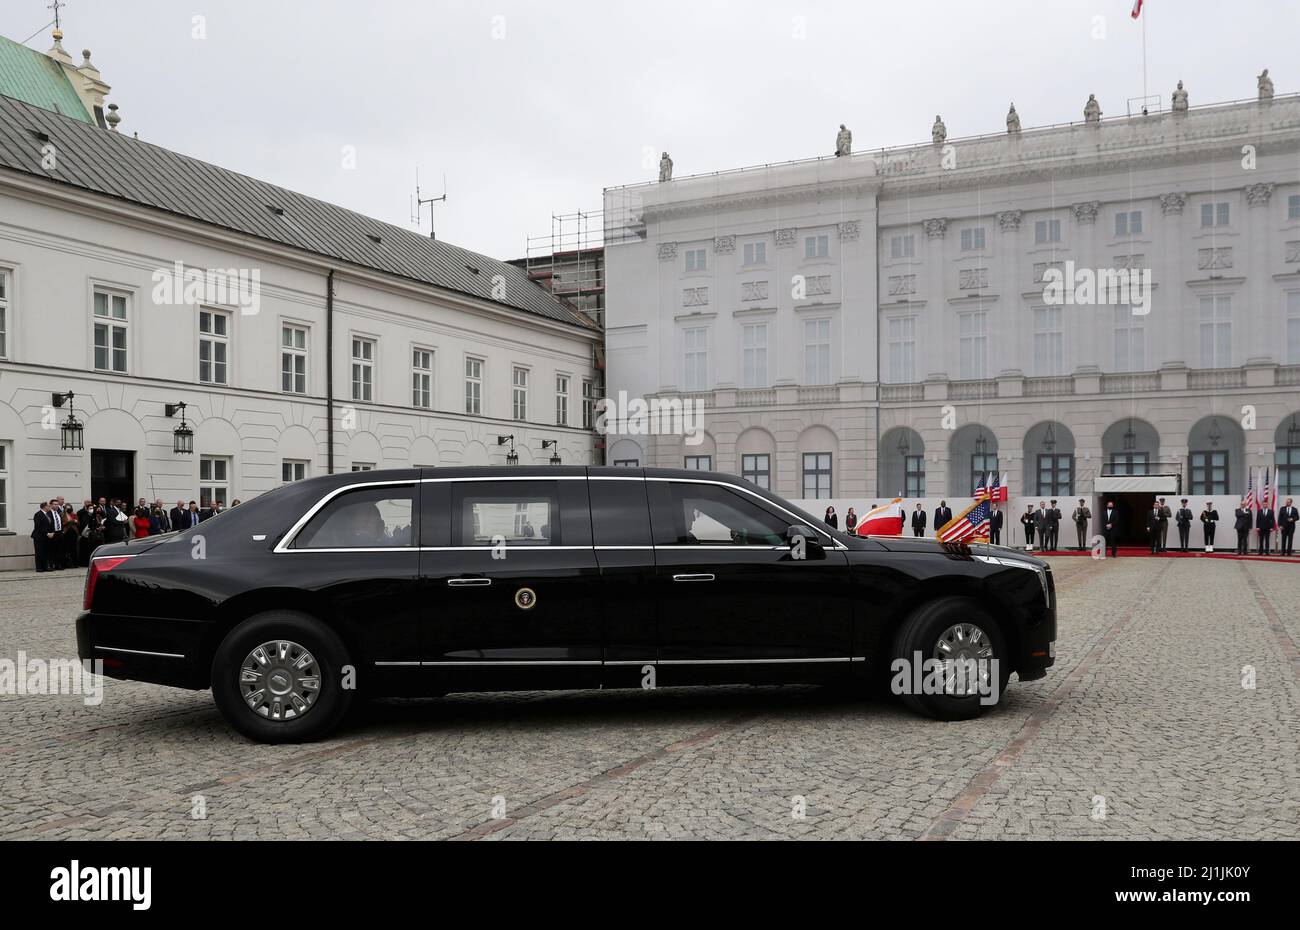 U.S. President Joe Biden is seen in the U.S. presidential state car, also known as The Beast, as he arrives for a meeting with Polish President Andrzej Duda, as the Russian invasion of Ukraine continues, outside the Presidential Palace in Warsaw, Poland March 26, 2022. REUTERS/Kacper Pempel Stock Photo